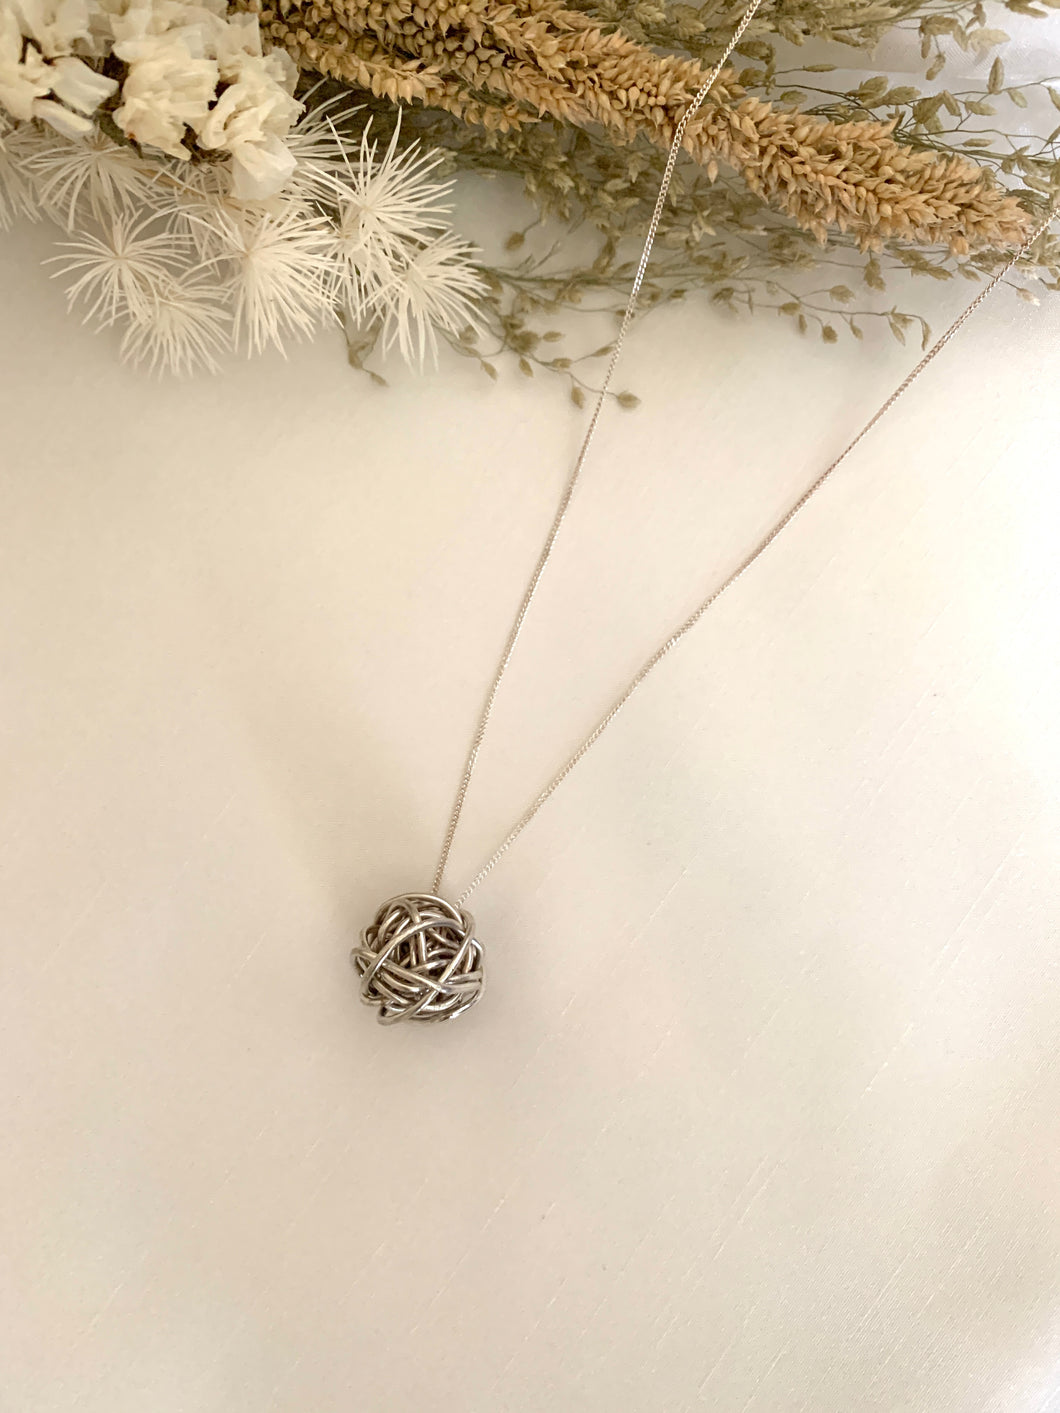 Pendant is a white gold ball of yarn in a white gold chain necklace.